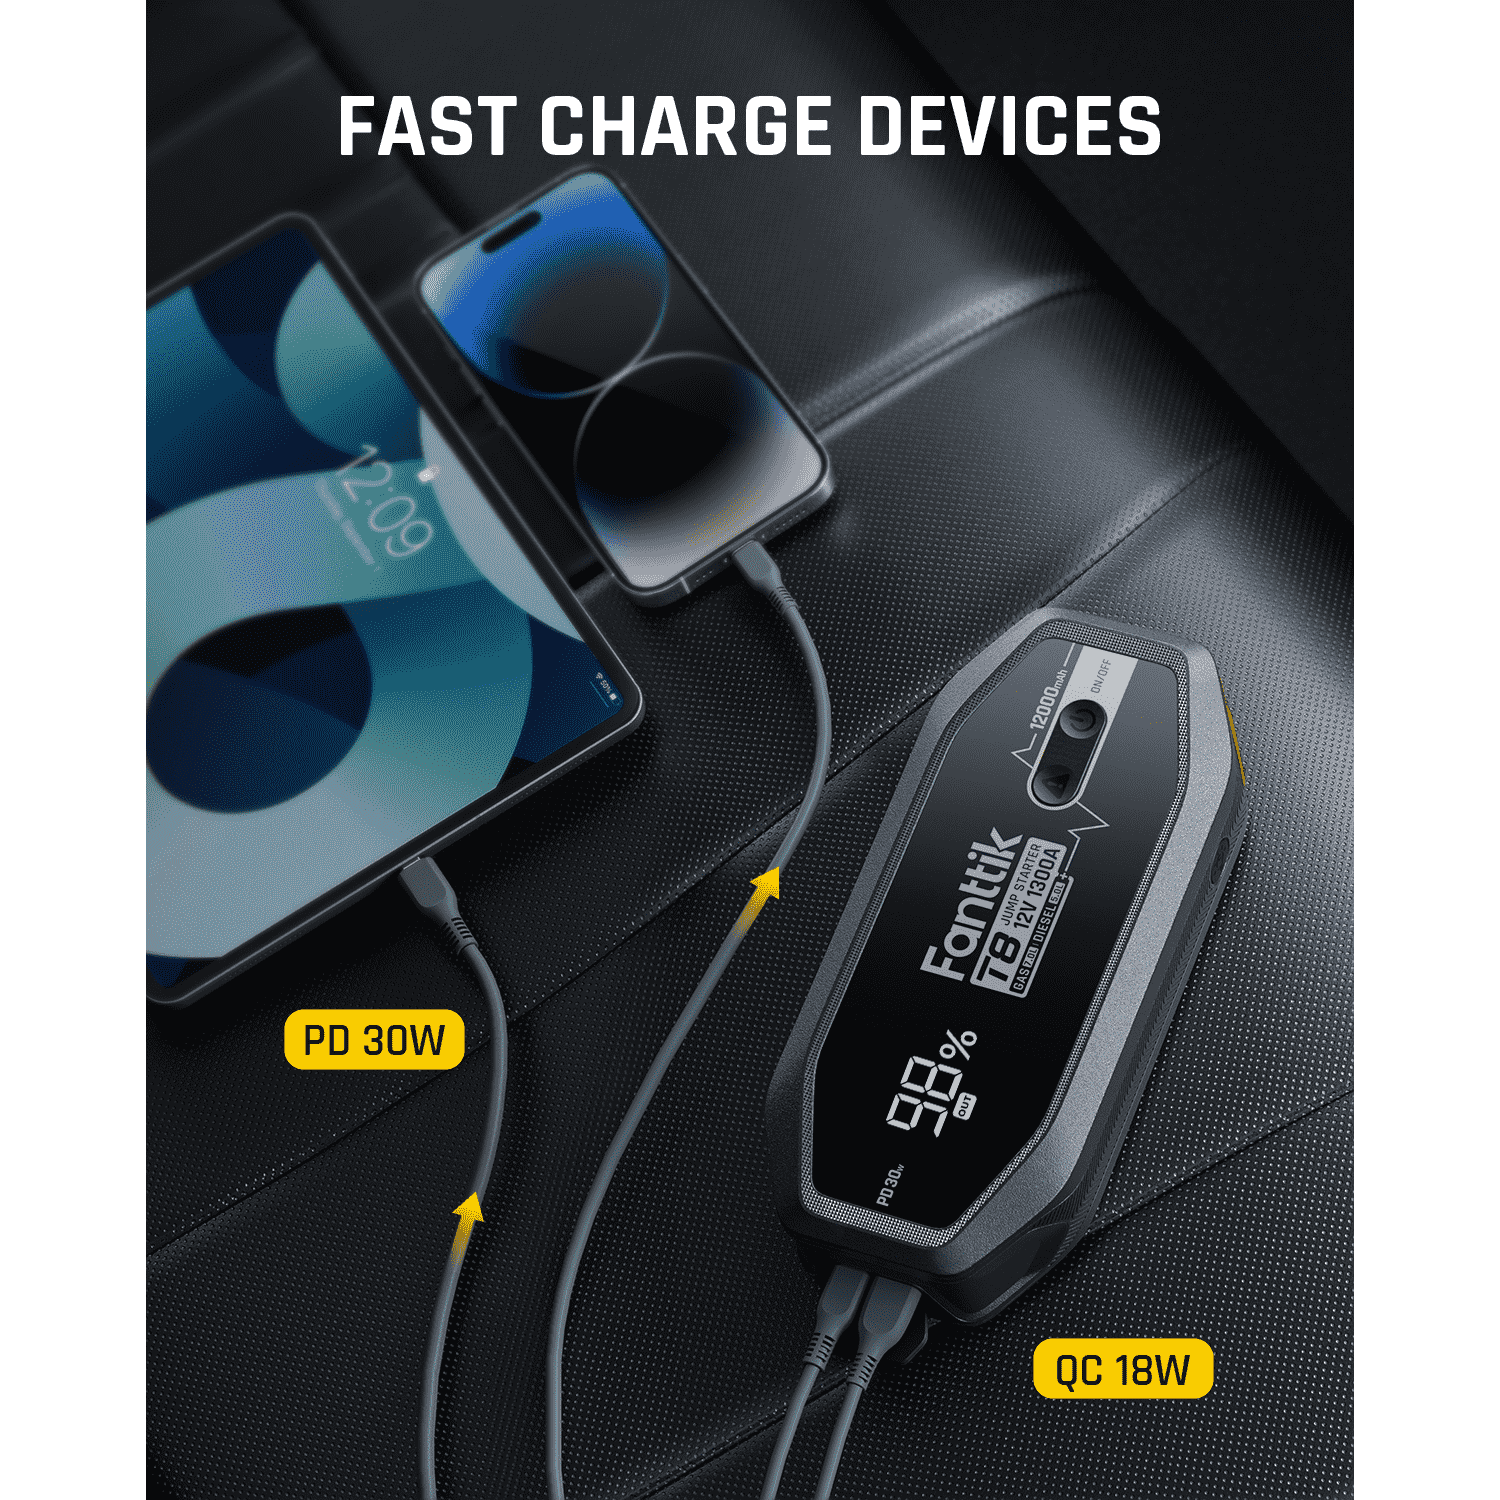 Fanttik T8 Jump Starter with 30W USB-C power delivery input and output, the battery pack completely recharges in 2 hours; Also enough to power up your laptops, phones, and other USB-C devices.